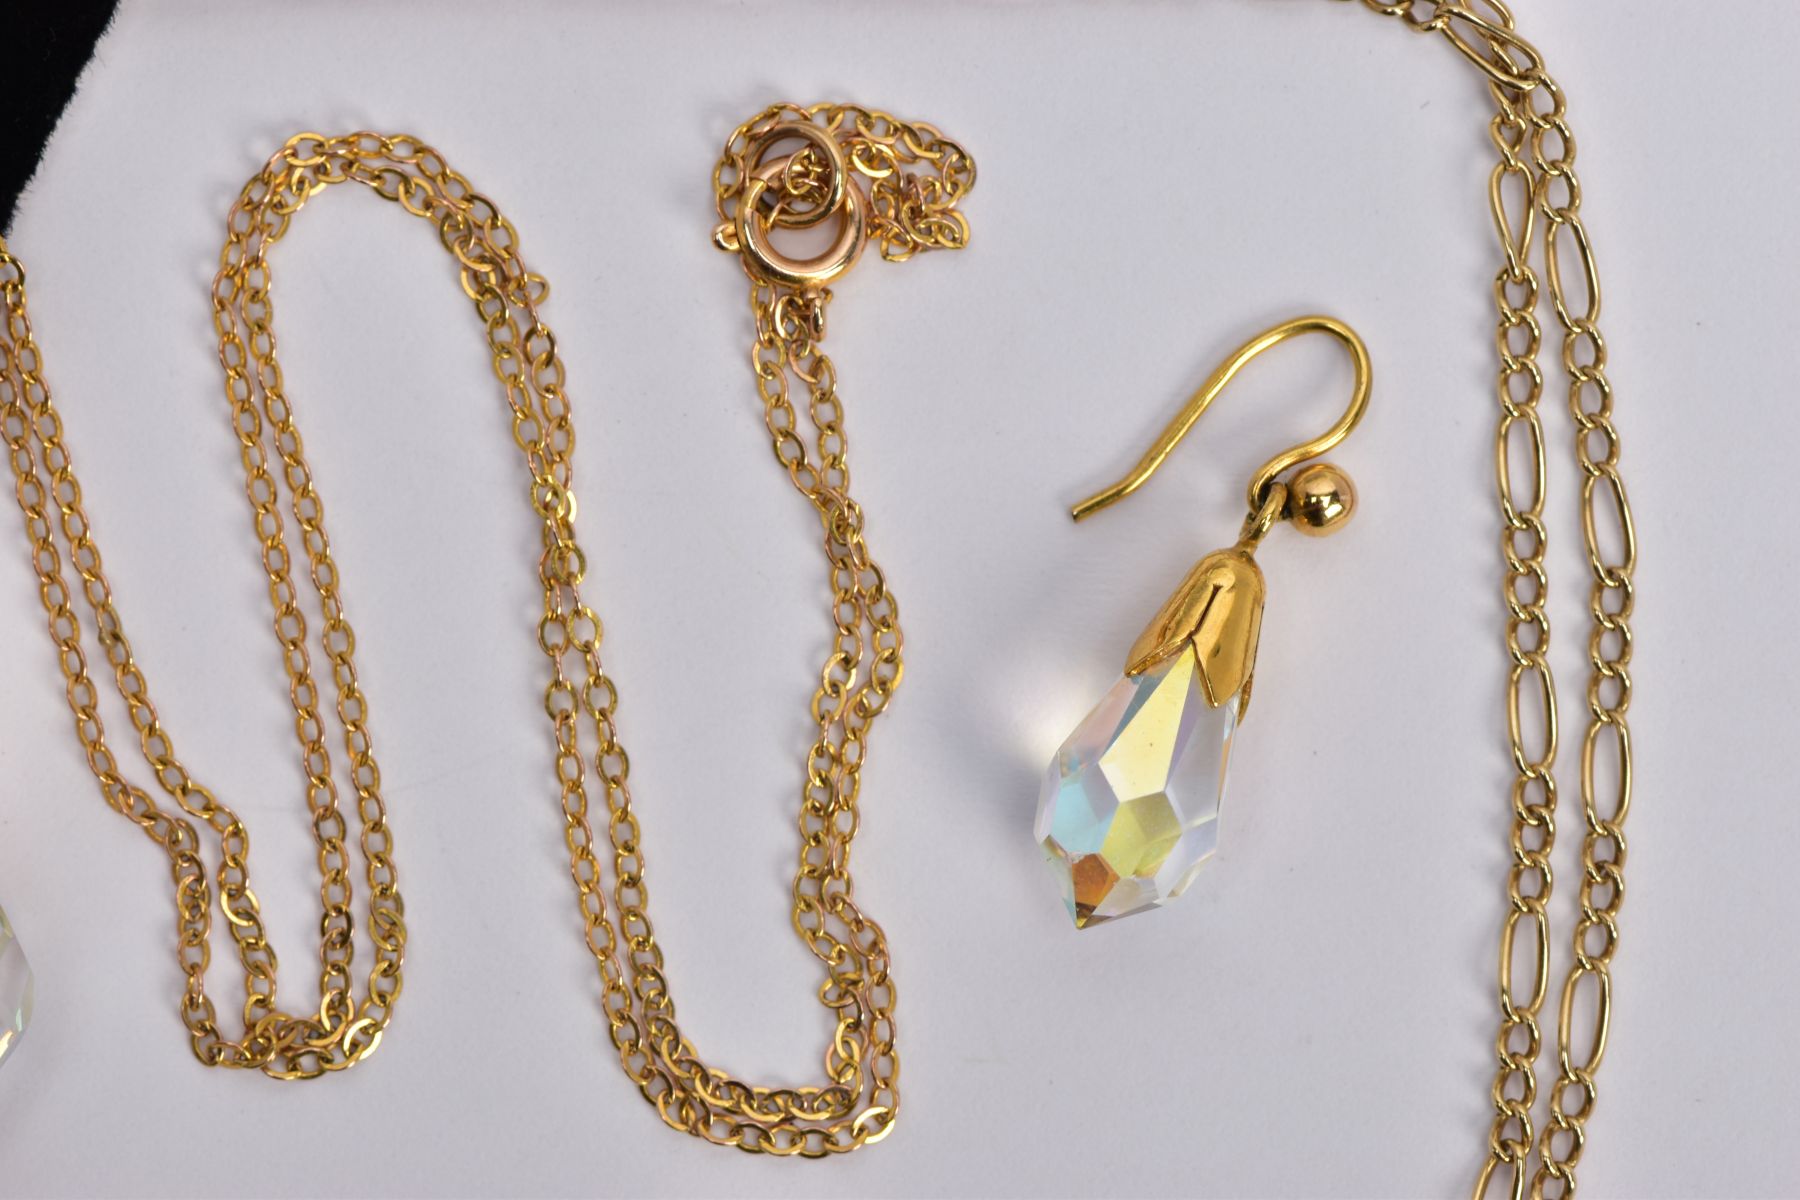 A 9CT GOLD CRYSTAL NECKLACE AND EARRING SET AND A YELLOW METAL CHAIN, a briolette faceted crystal - Image 2 of 3